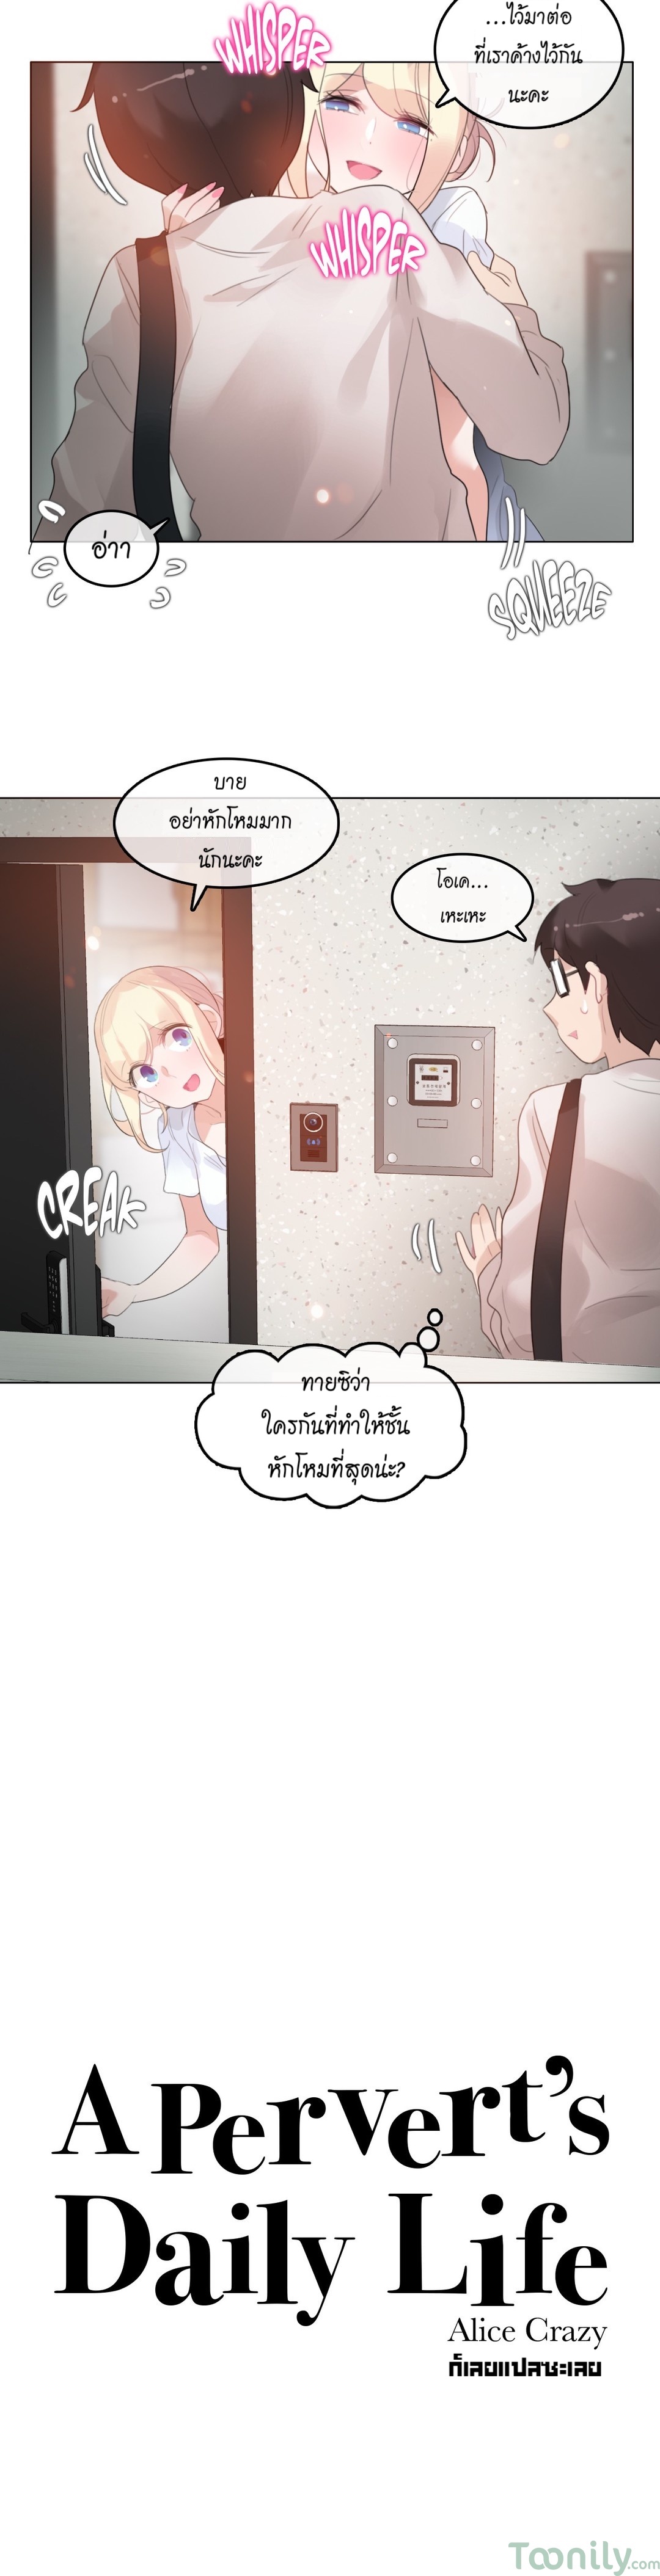 A Pervert’s Daily Life61 (4)